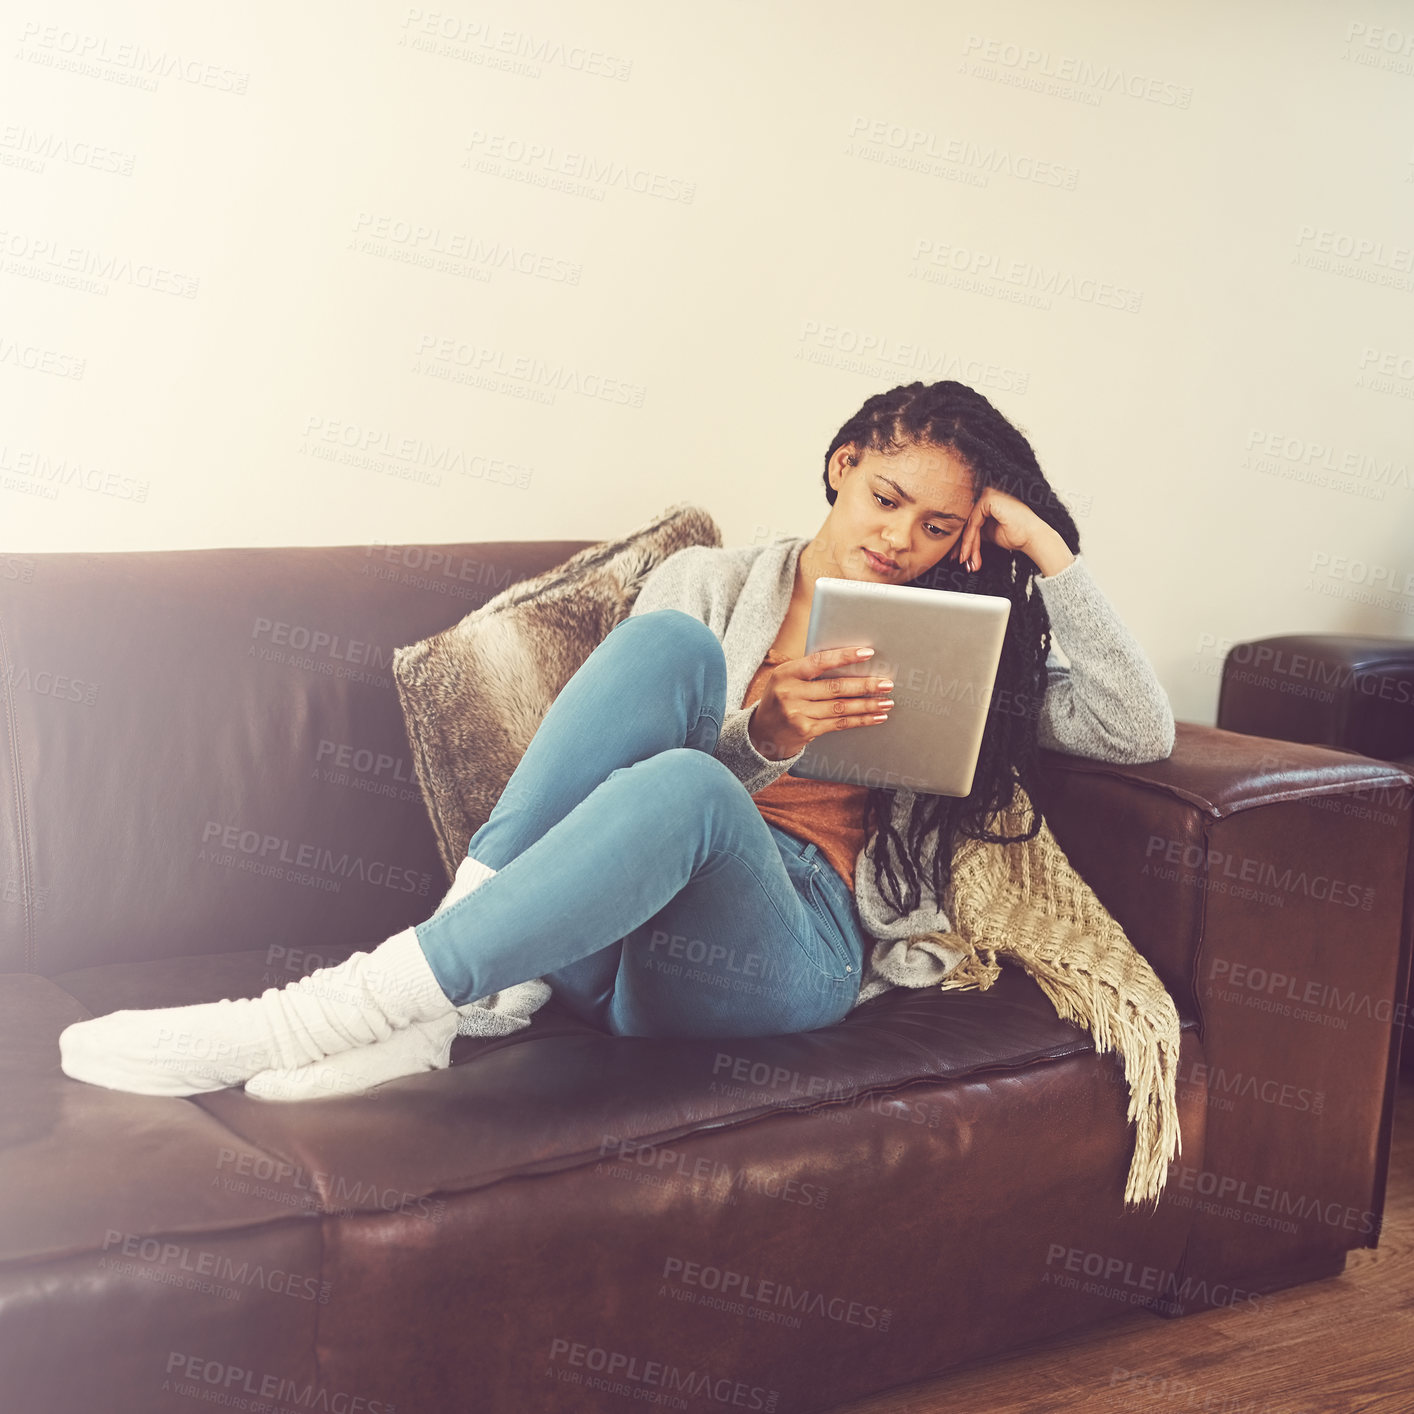 Buy stock photo Shot of a young woman using her tablet while relaxing at home